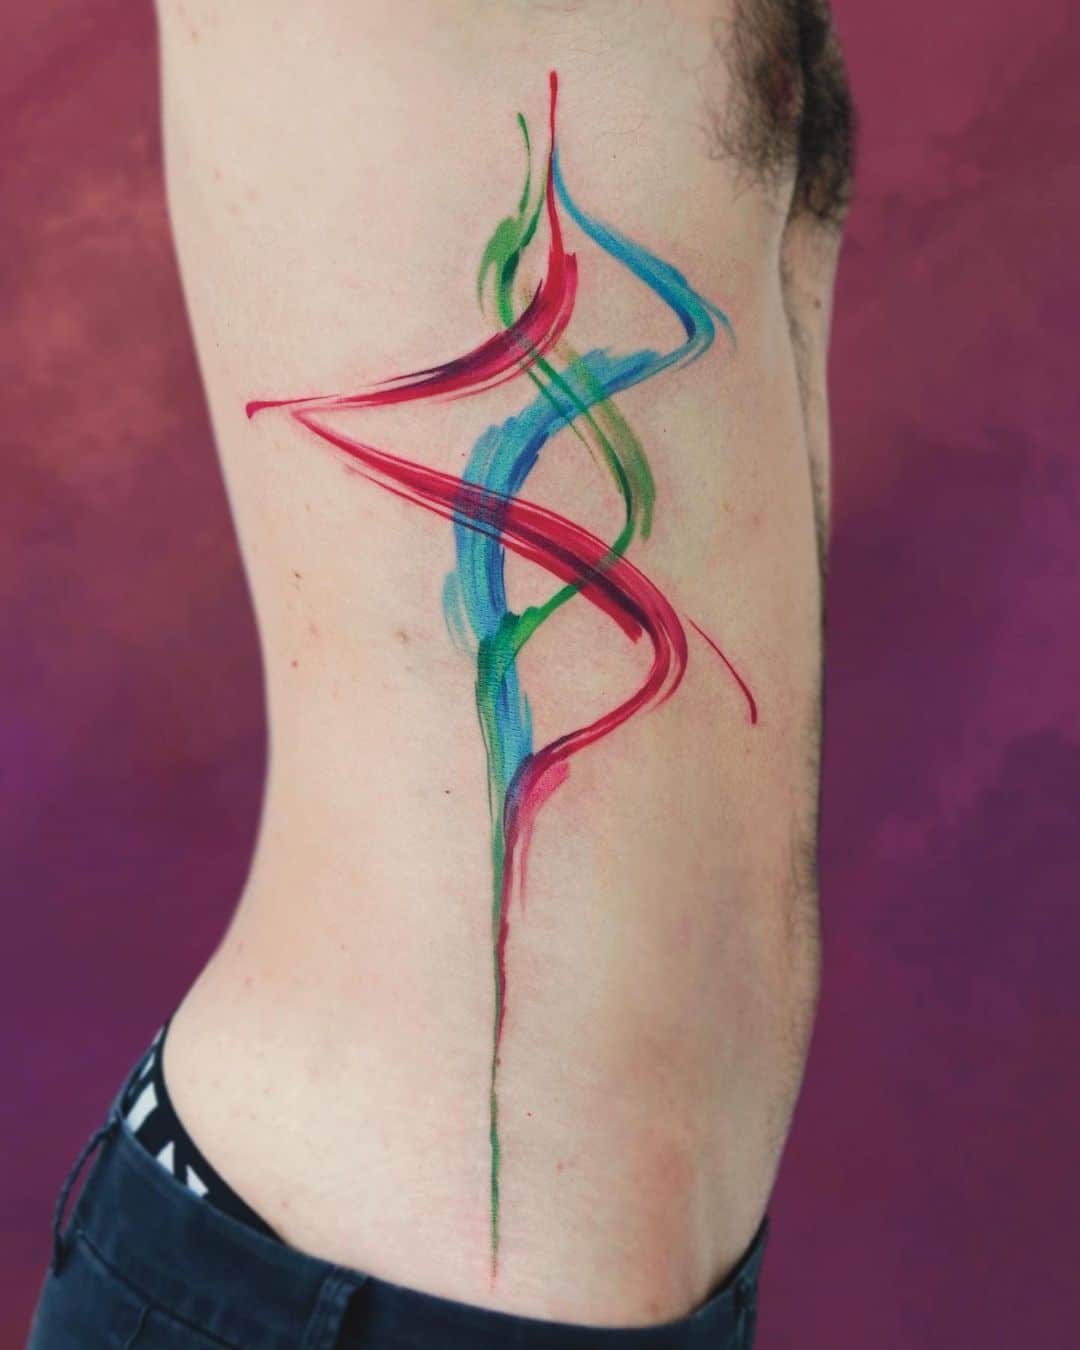 Abtract Colorful Tattoo On The Rib